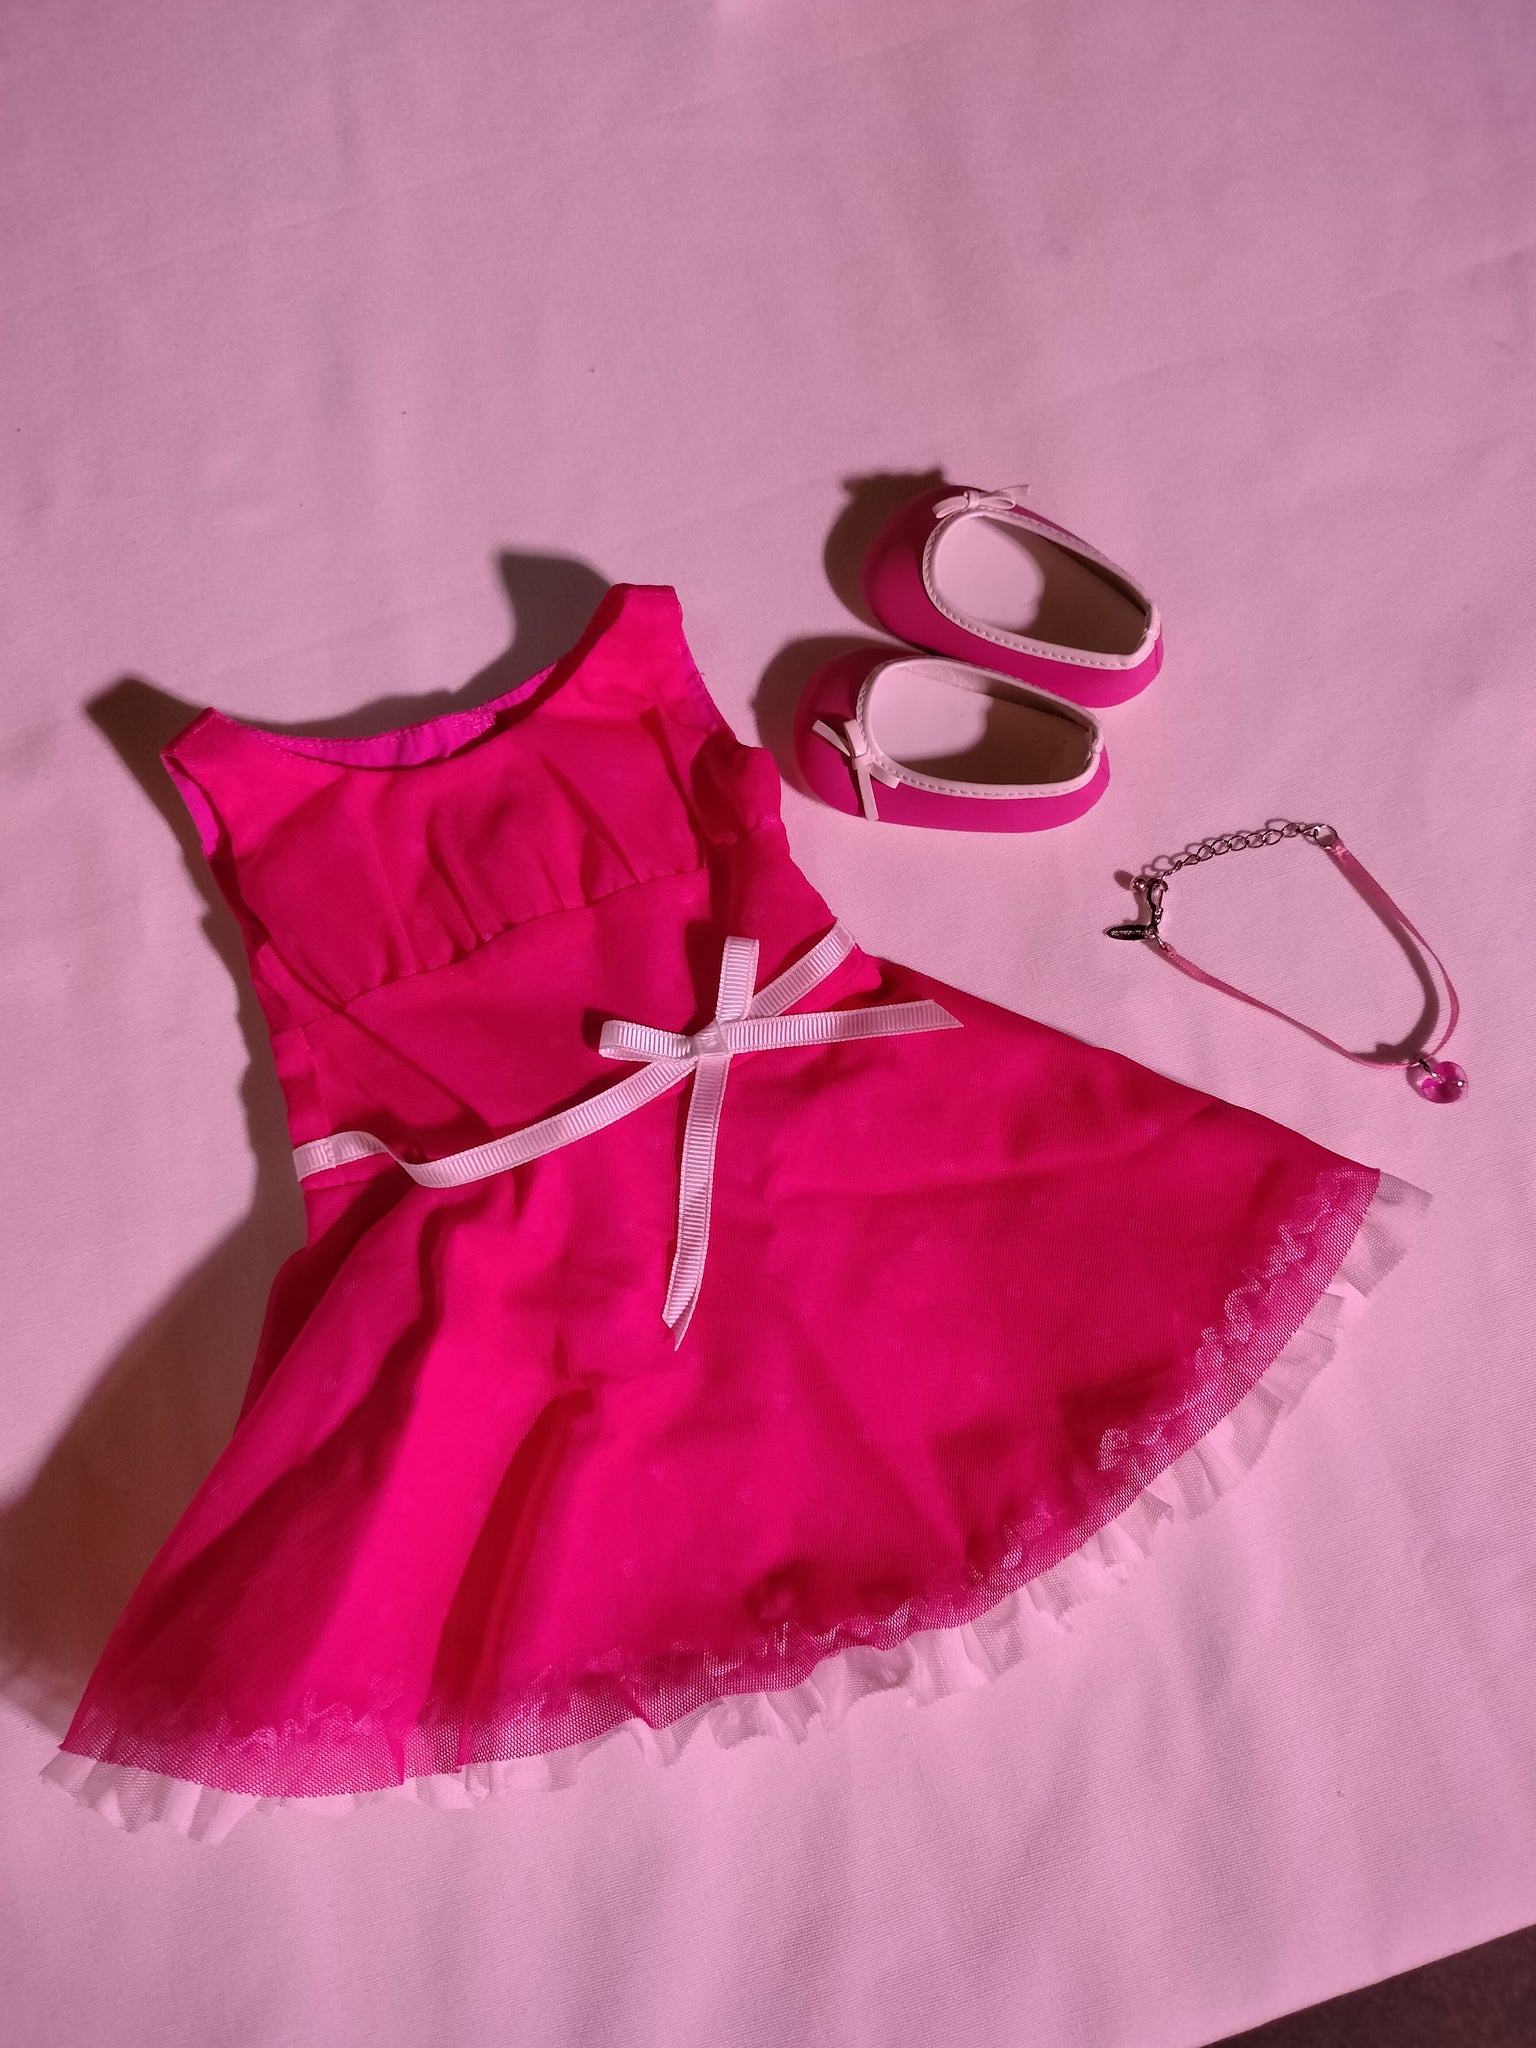 American Girl - Pink Heart Dress Complete with Necklace and Shoes